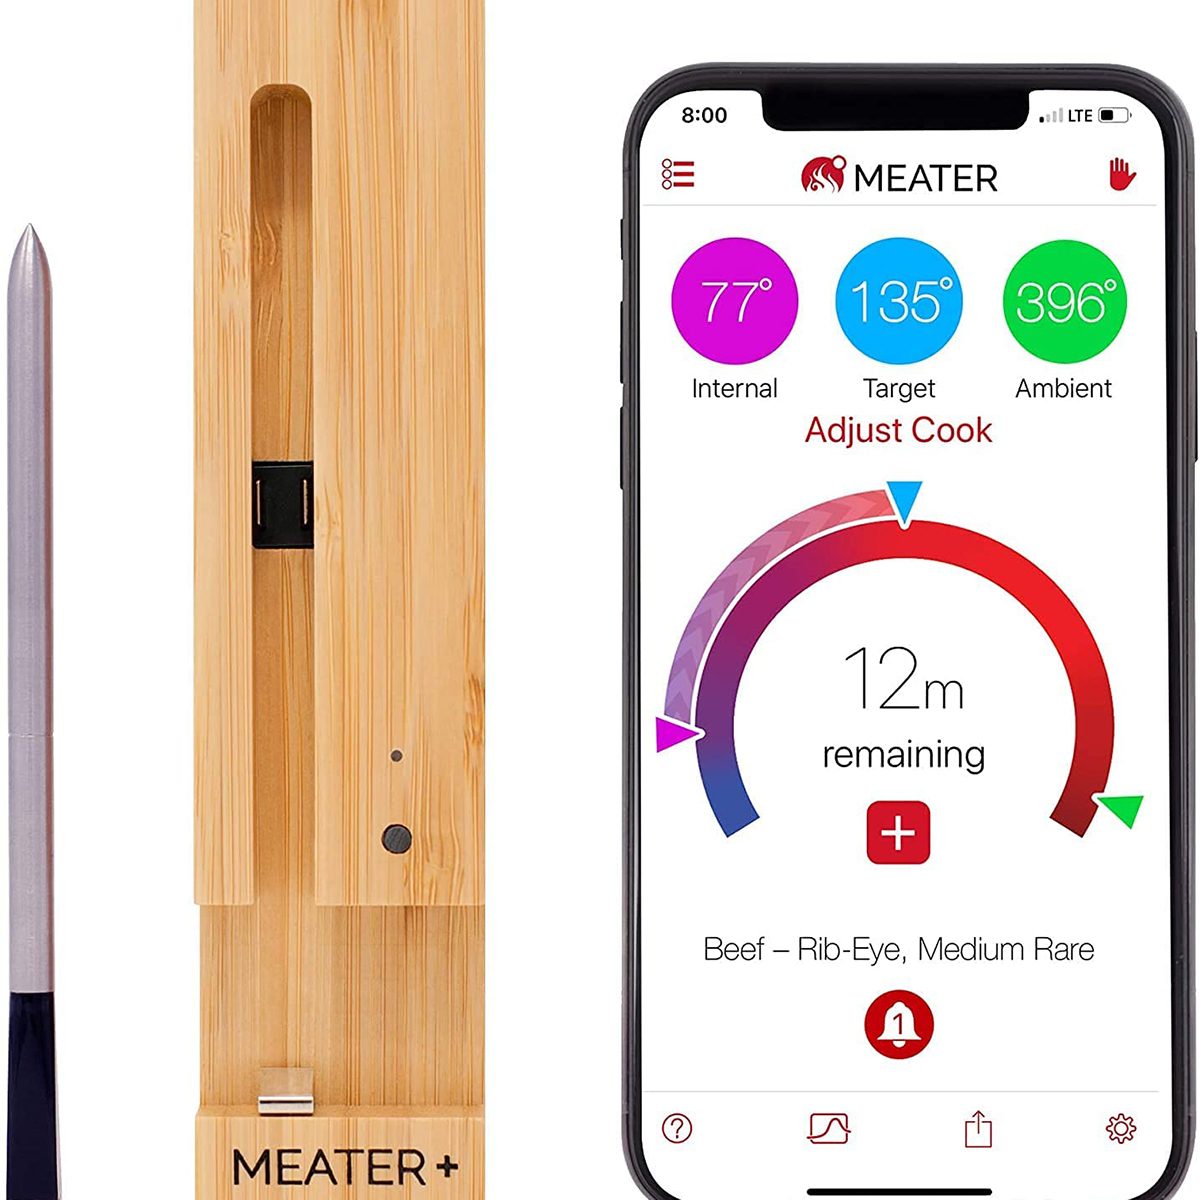 Chef IQ Smart Thermometer Extra Probe No. 2, Bluetooth/Wifi Enabled, allows Monitoring of Two Foods at Once, for Grill, Oven, SM